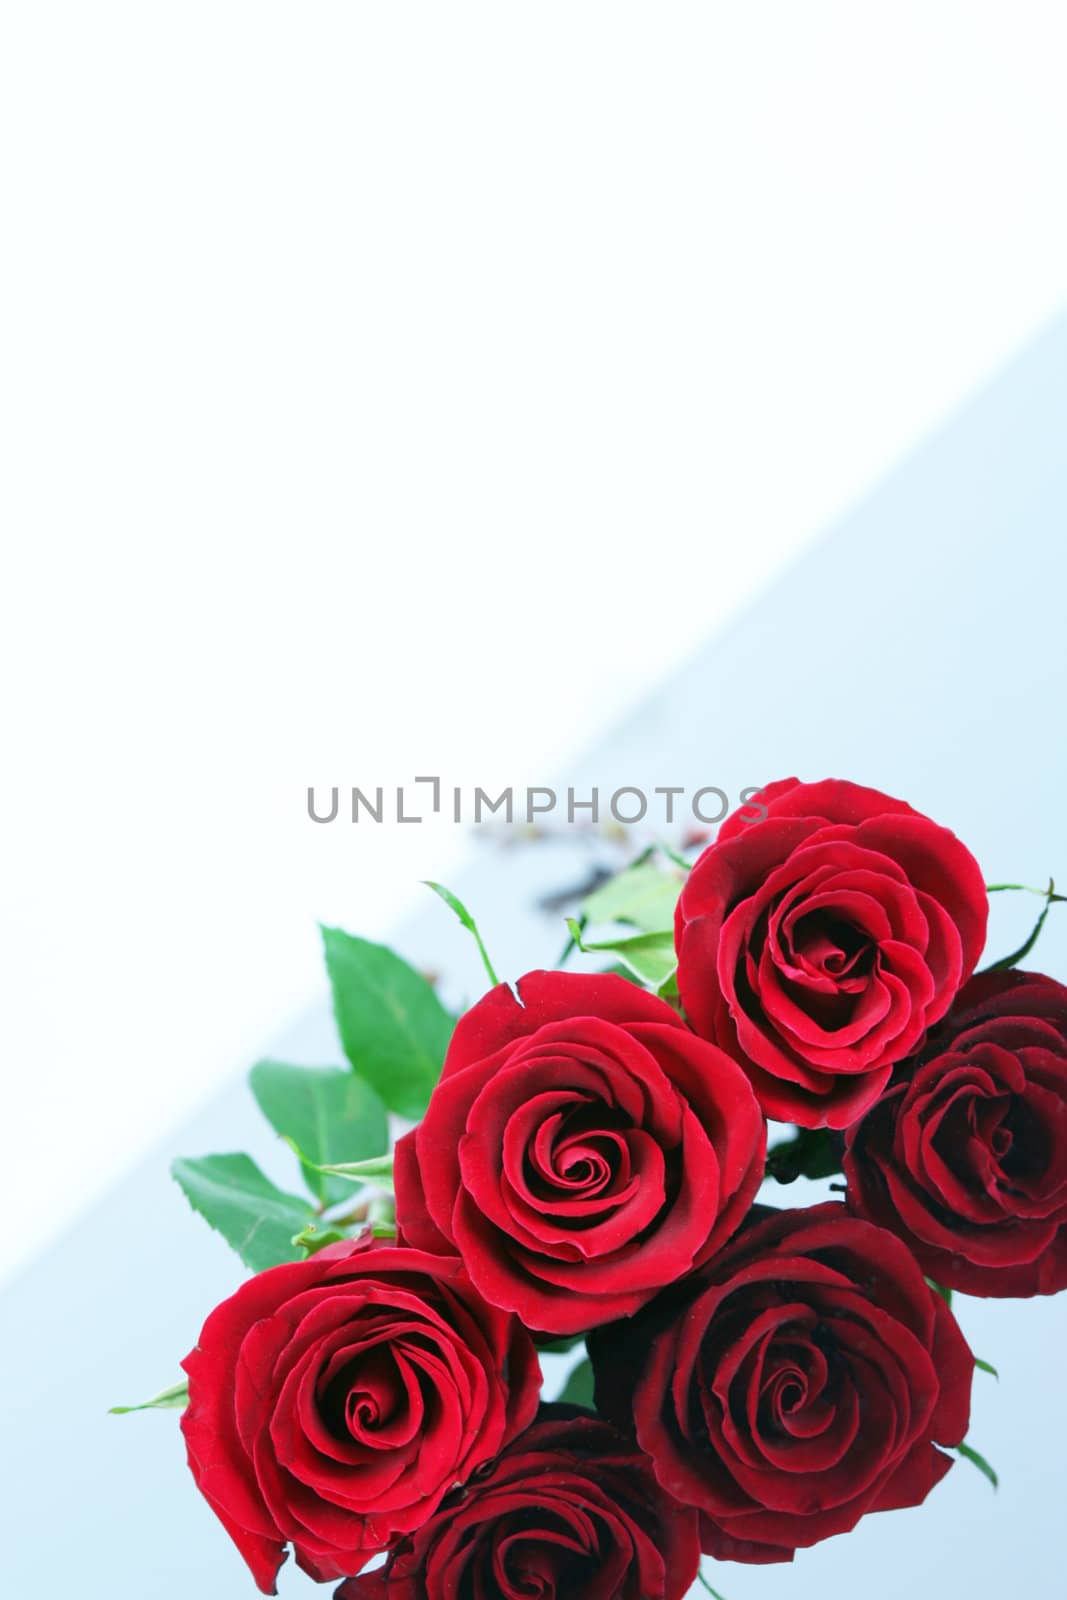 Three red roses isolated on reflective surface.